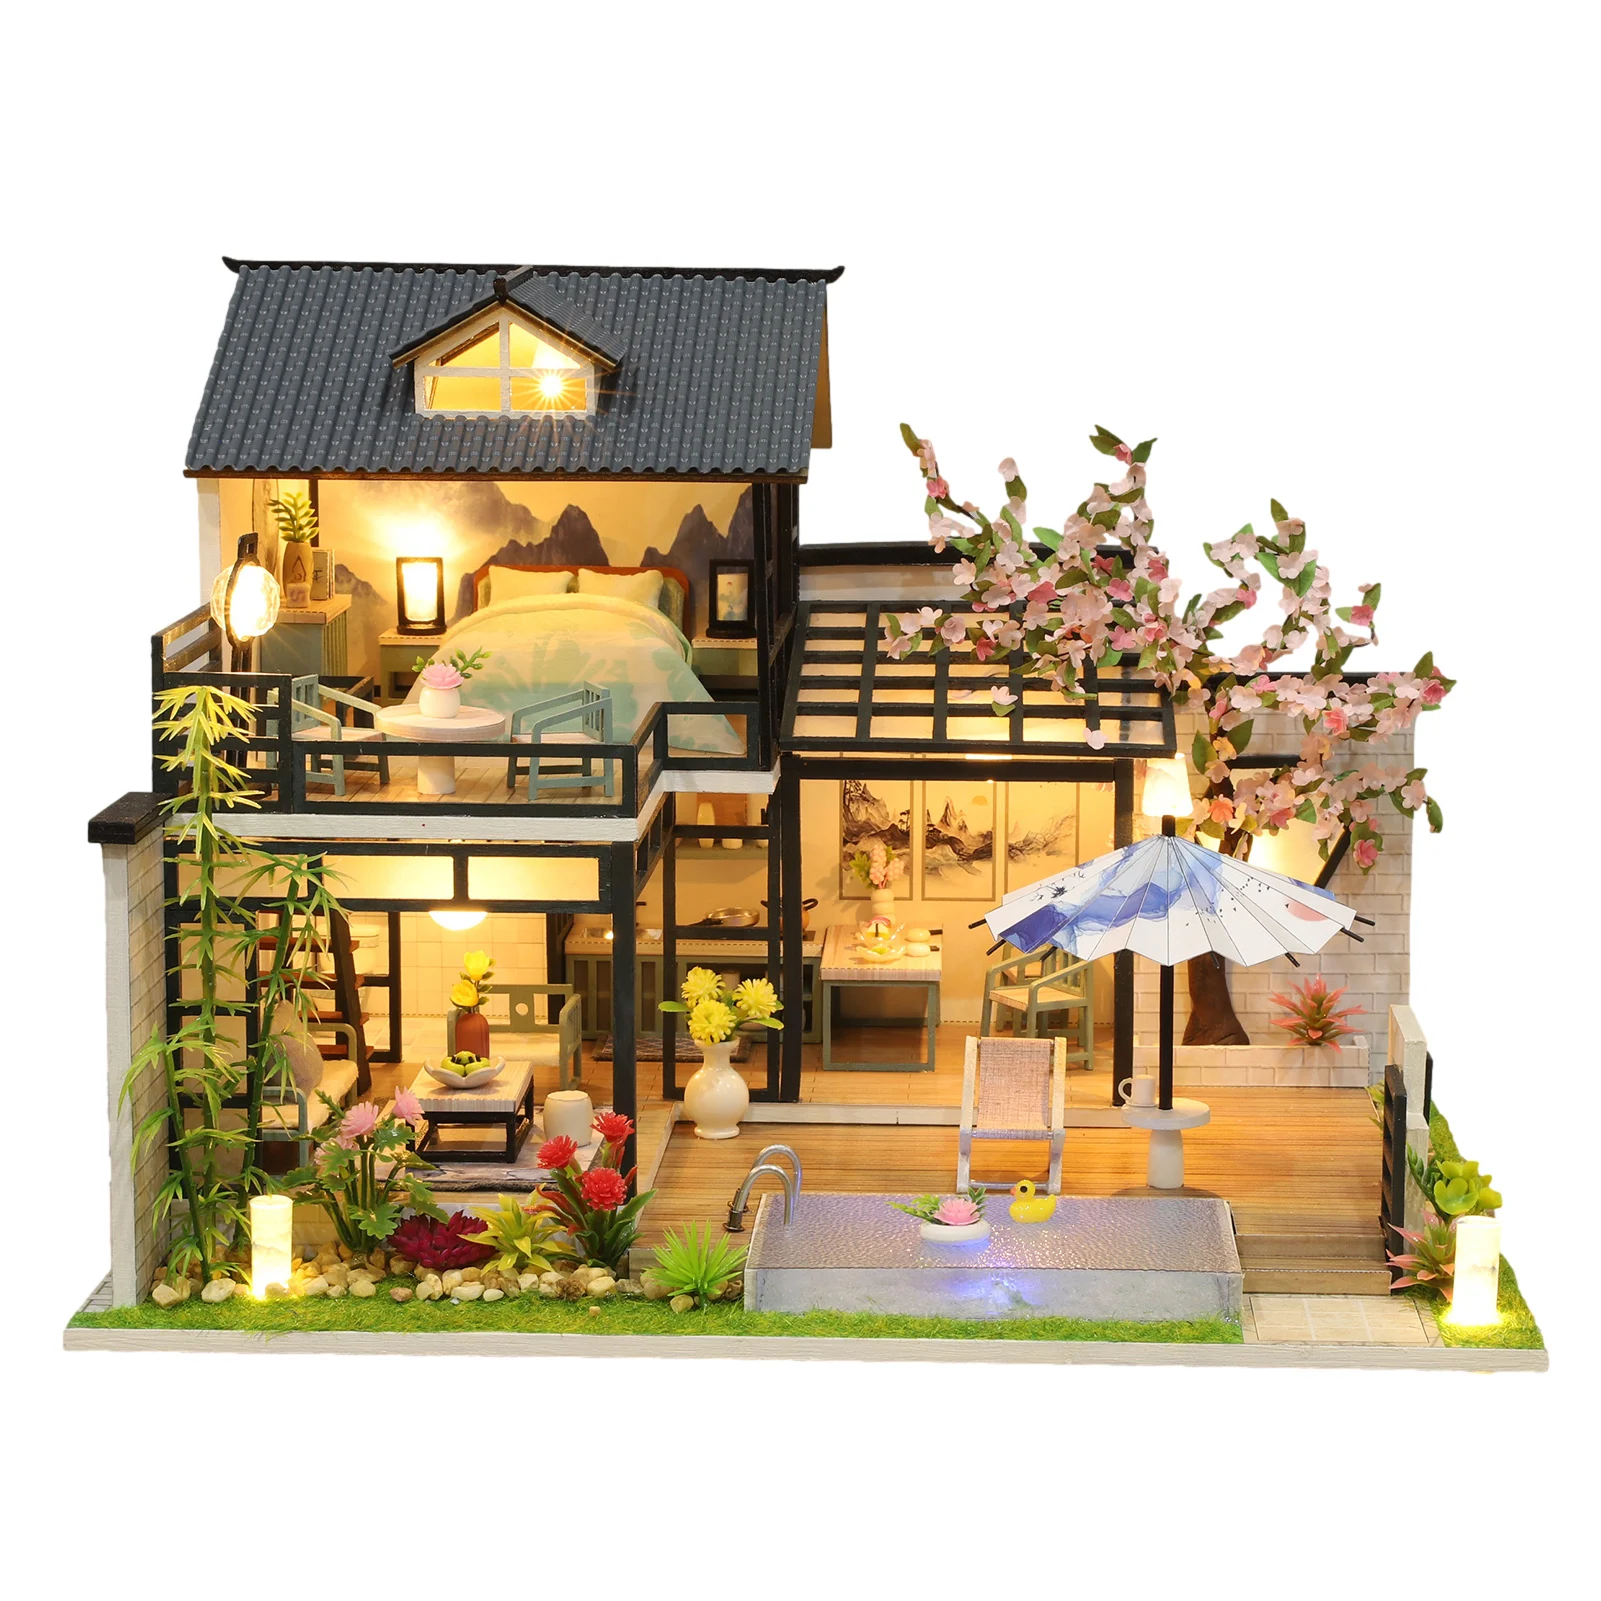 

Miniature 3D Greenhouse Kit Wooden Dollhouse With Furniture Craft Kits For 14 Years Old For Adults DIY Wooden Doll House Kit Wit